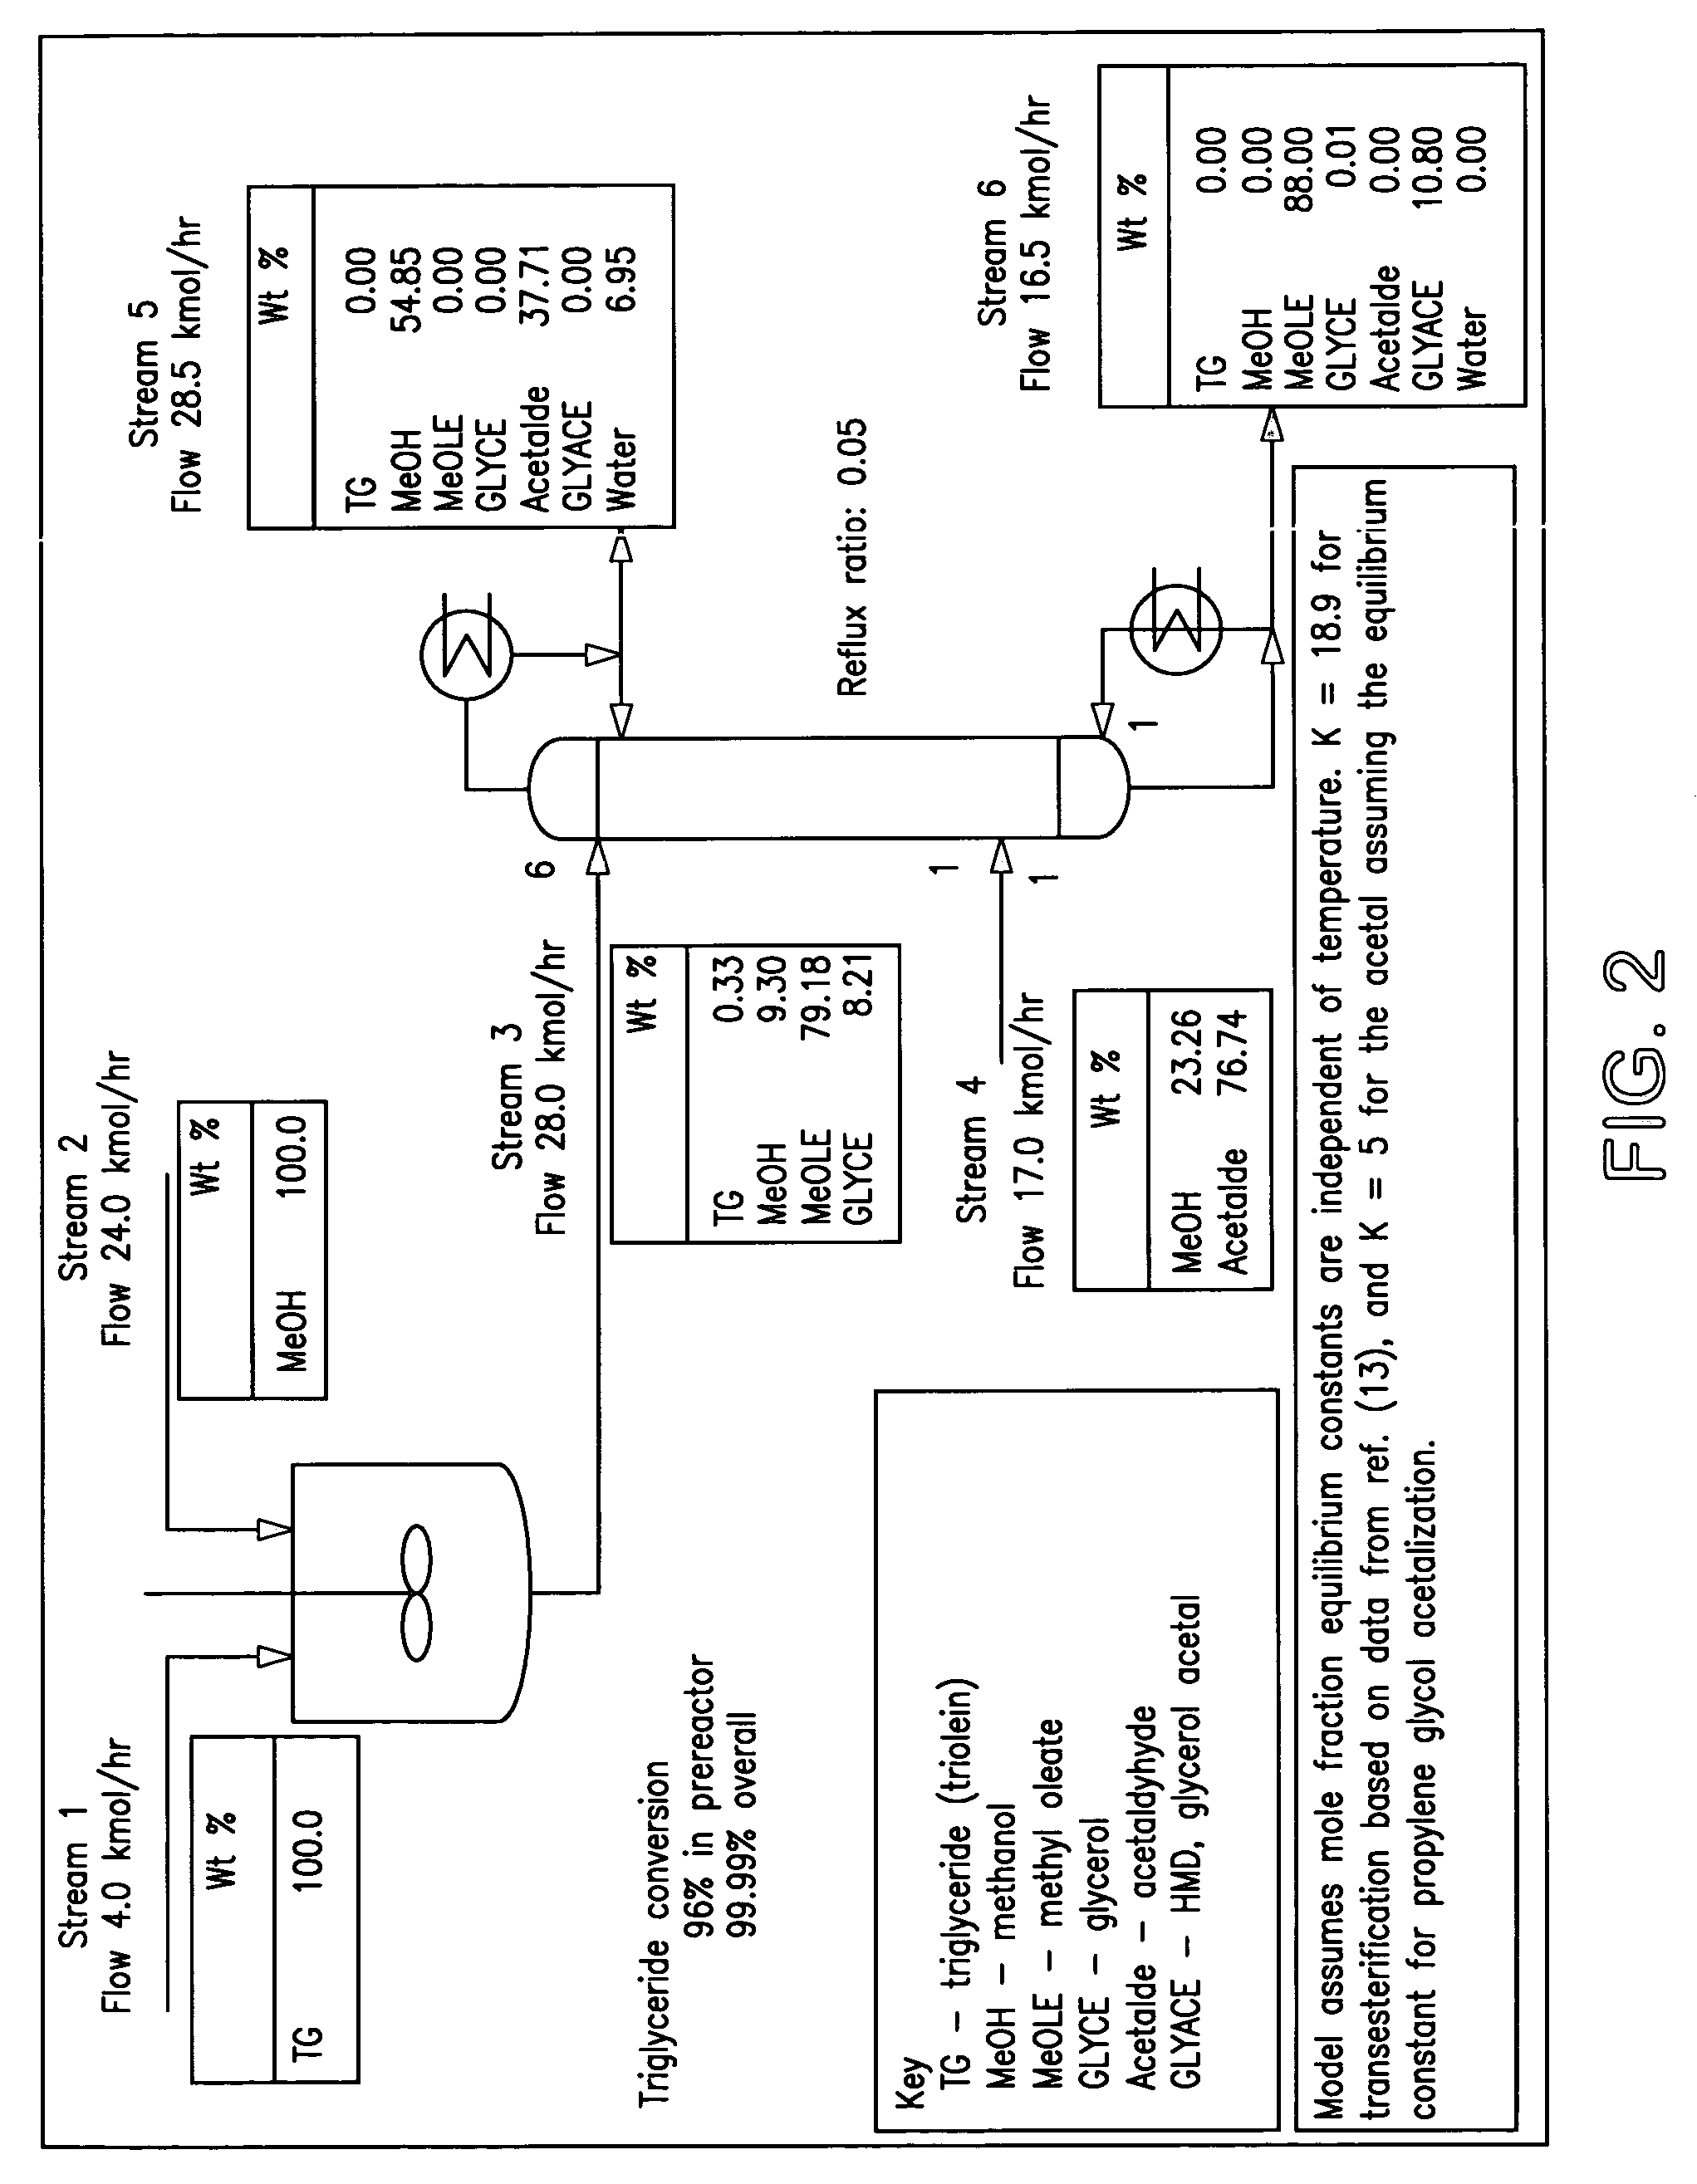 Process for production of a composition useful as a fuel